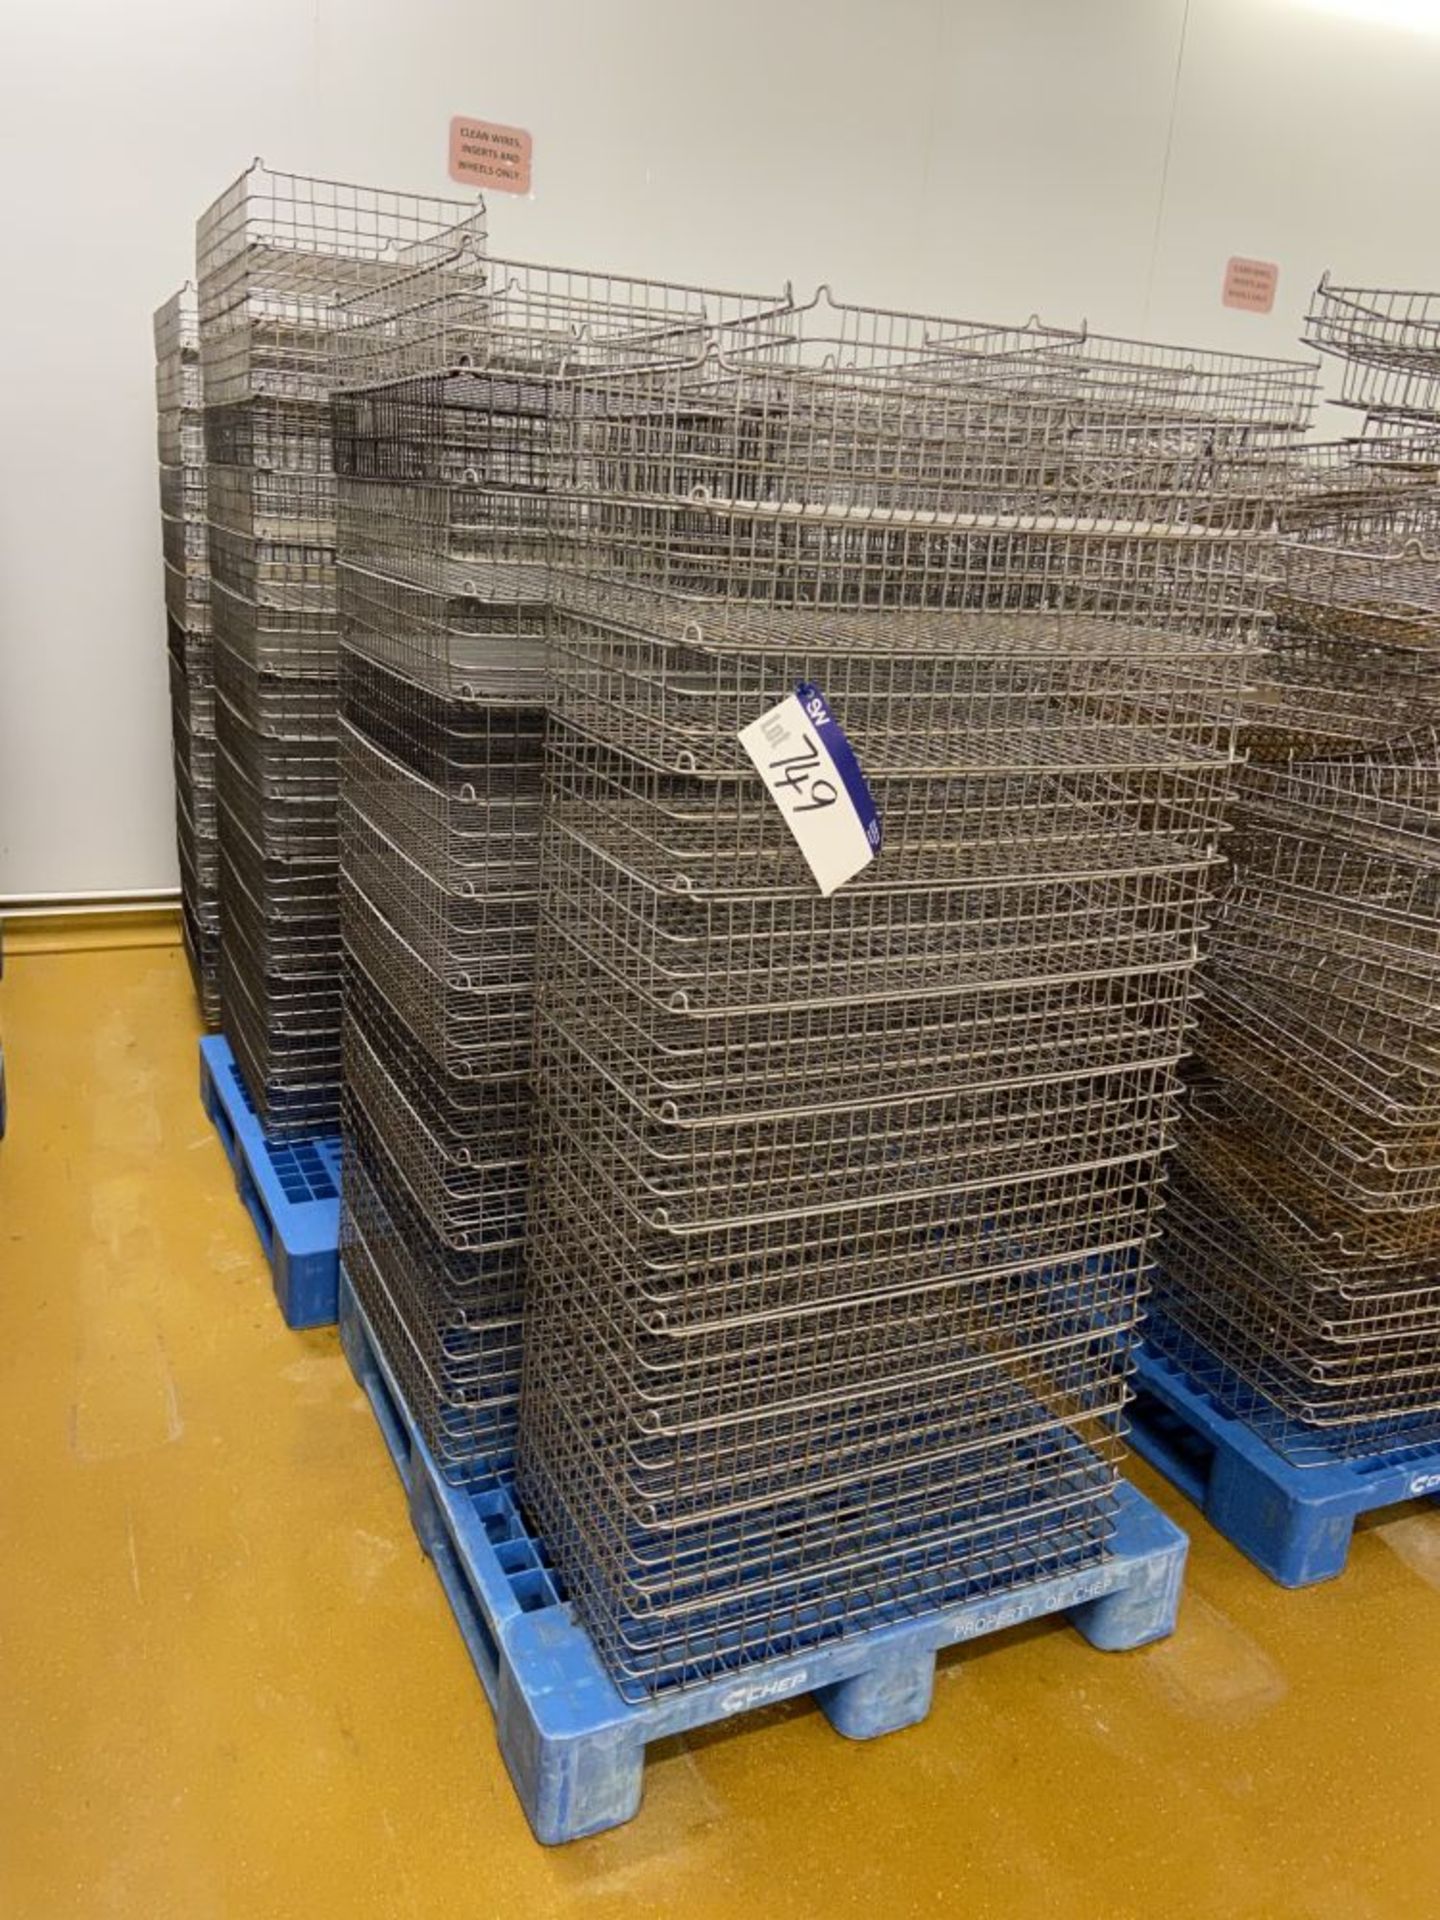 Quantity of Stainless Steel Wire Mesh Baking Trays, with three plastic palletsPlease read the